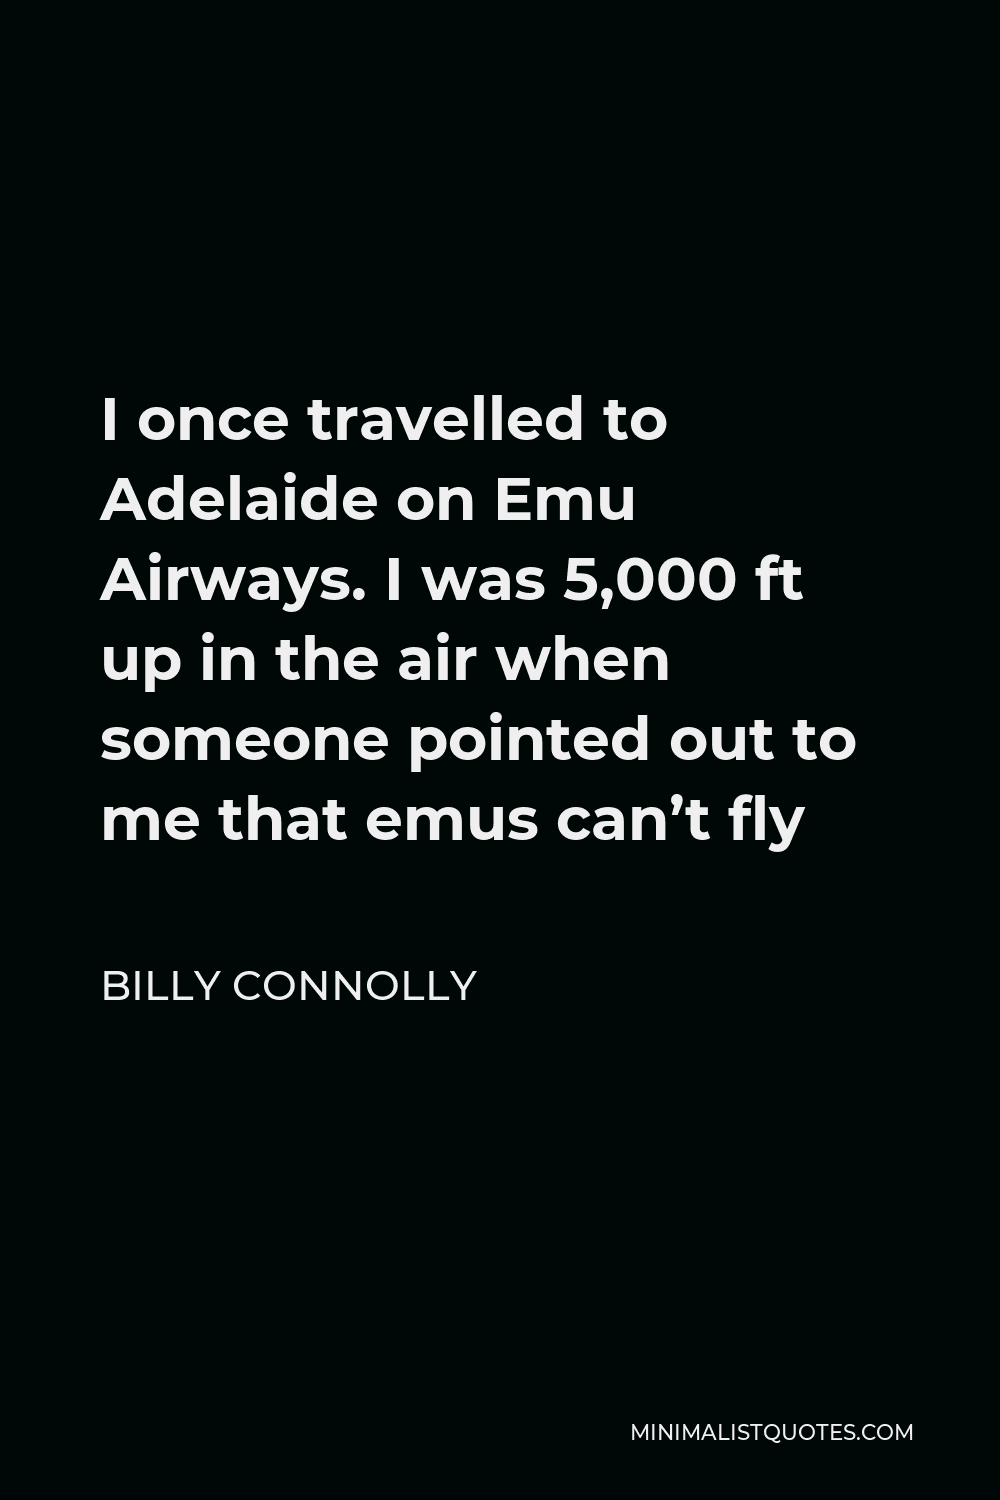 Billy Connolly Quote - I once travelled to Adelaide on Emu Airways. I was 5,000 ft up in the air when someone pointed out to me that emus can’t fly